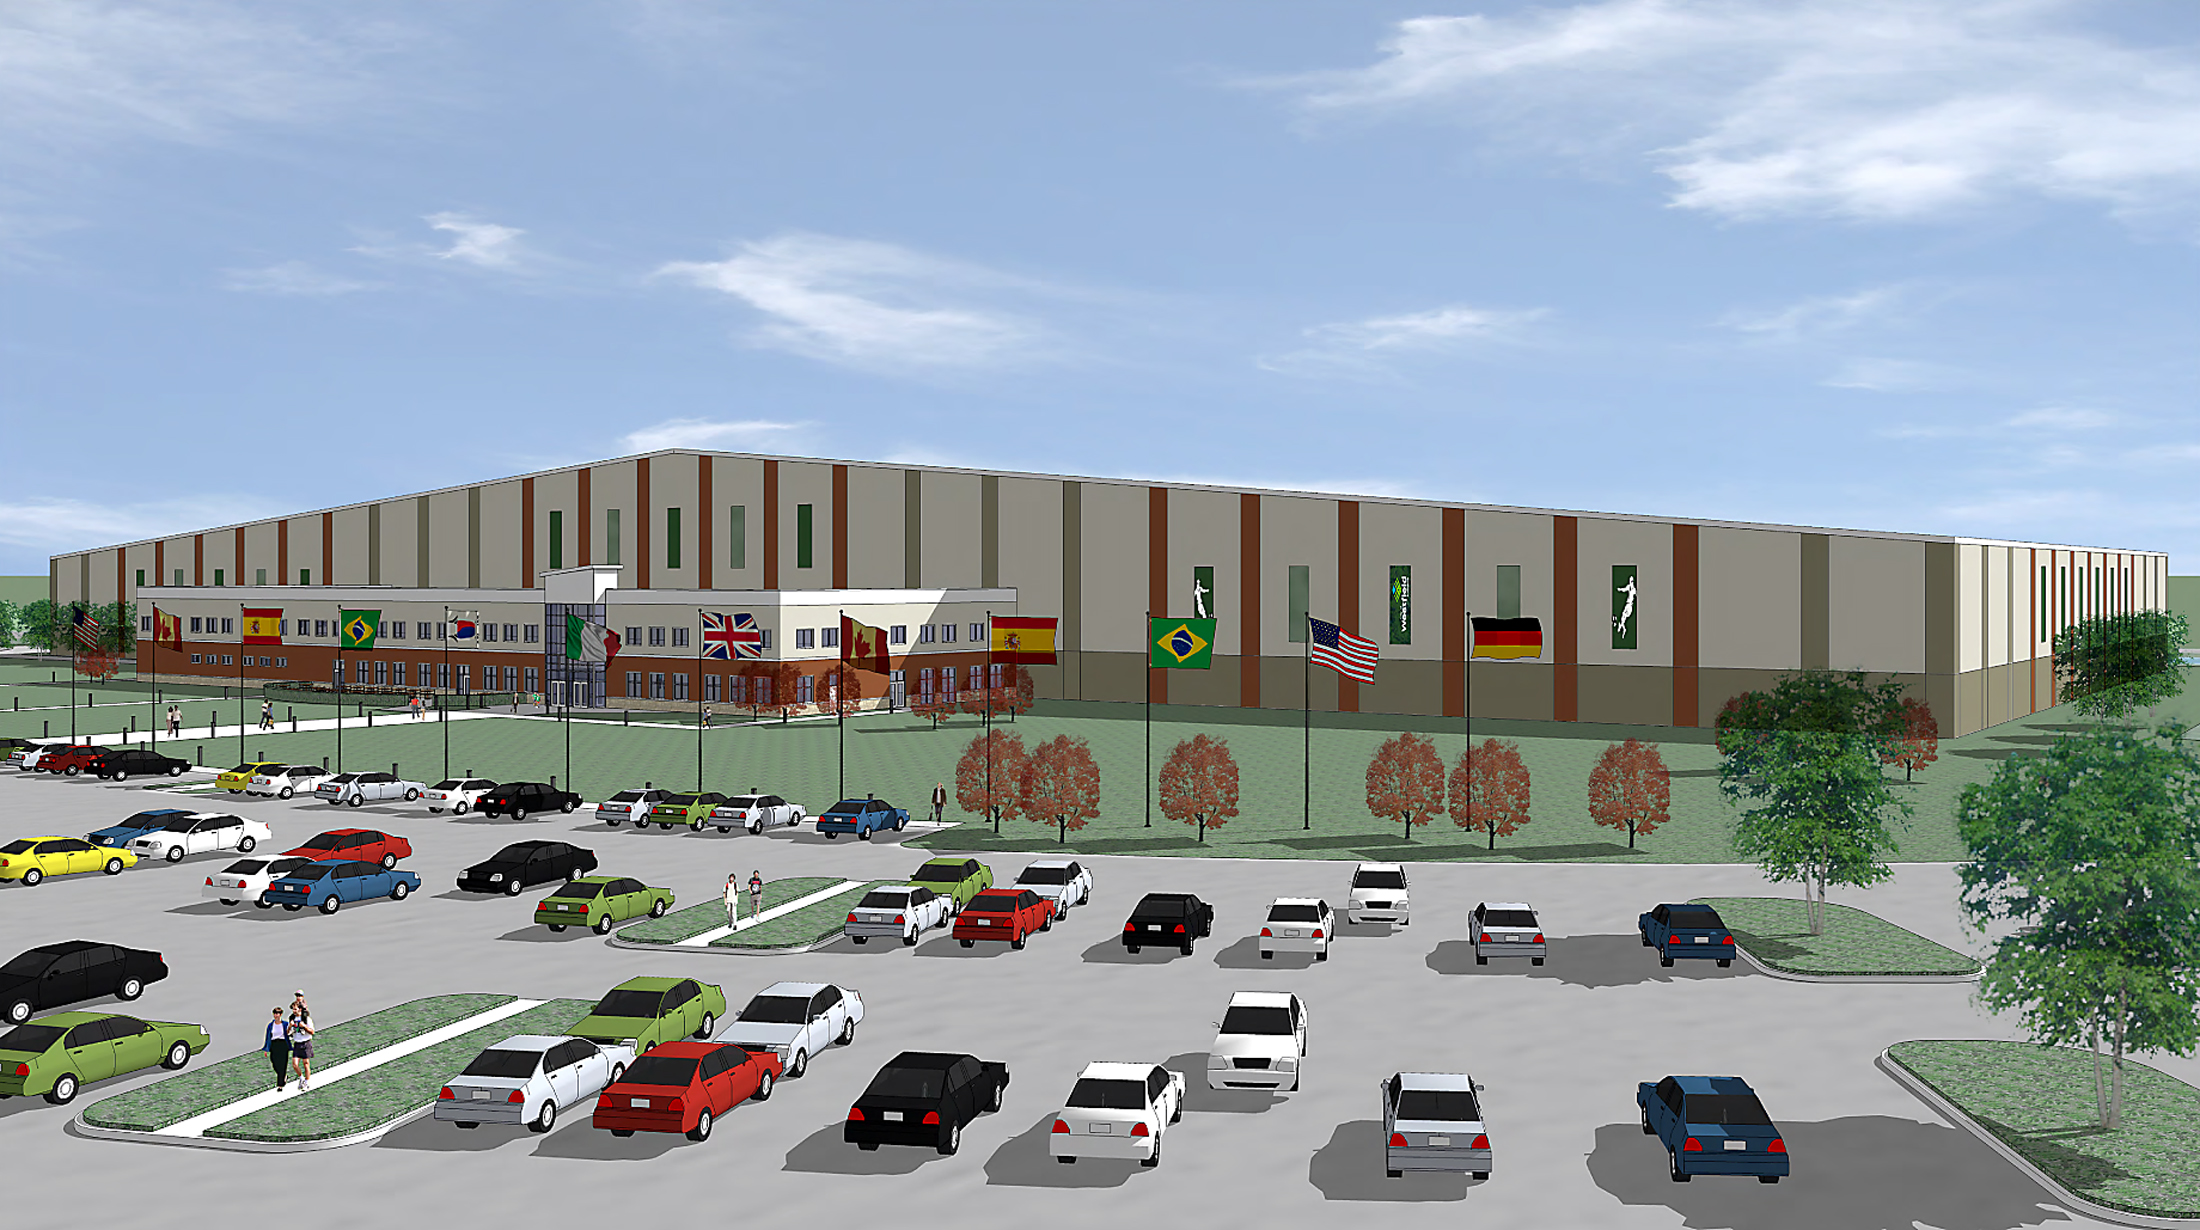 Plans for a new indoor soccer facility were unveiled at the Grand Park Grand Opening on June 21. (Submitted rendering)